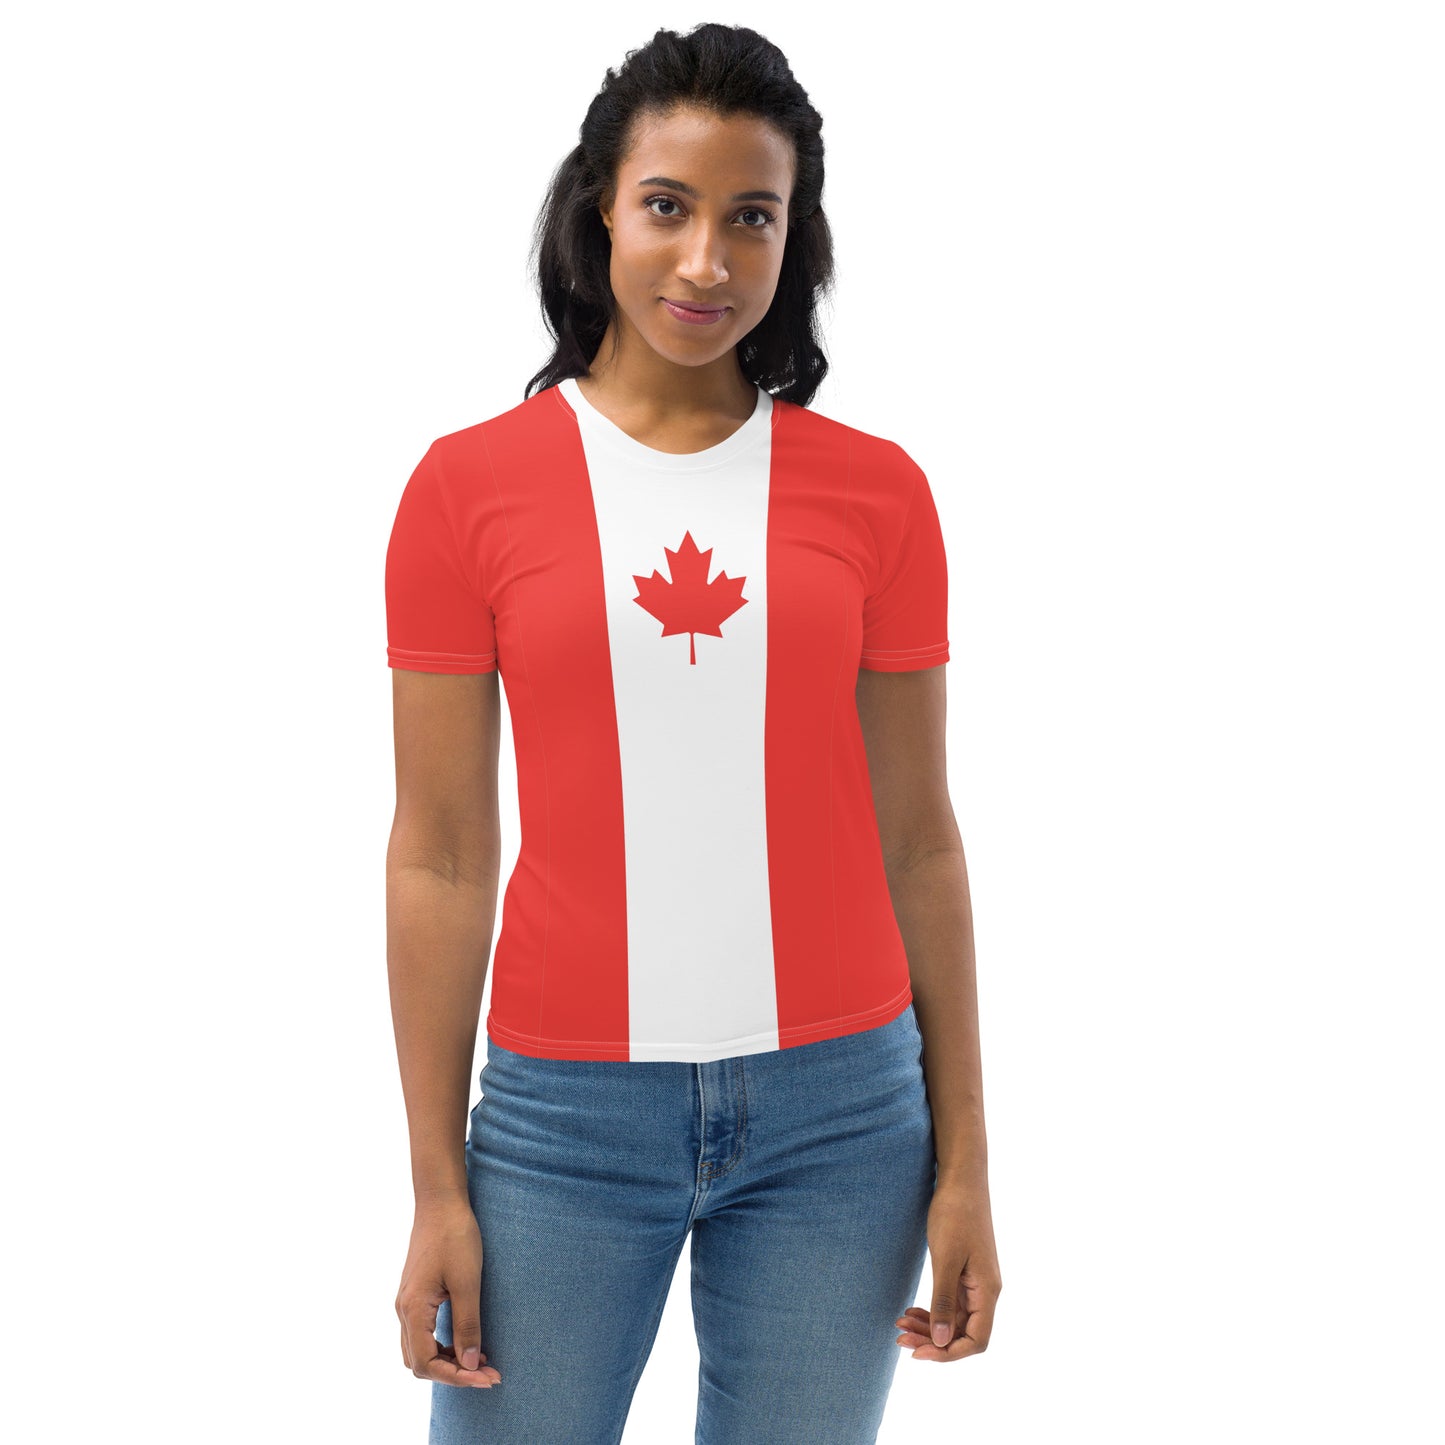 Red and White Women's T-Shirt - Celebrate Canada Day